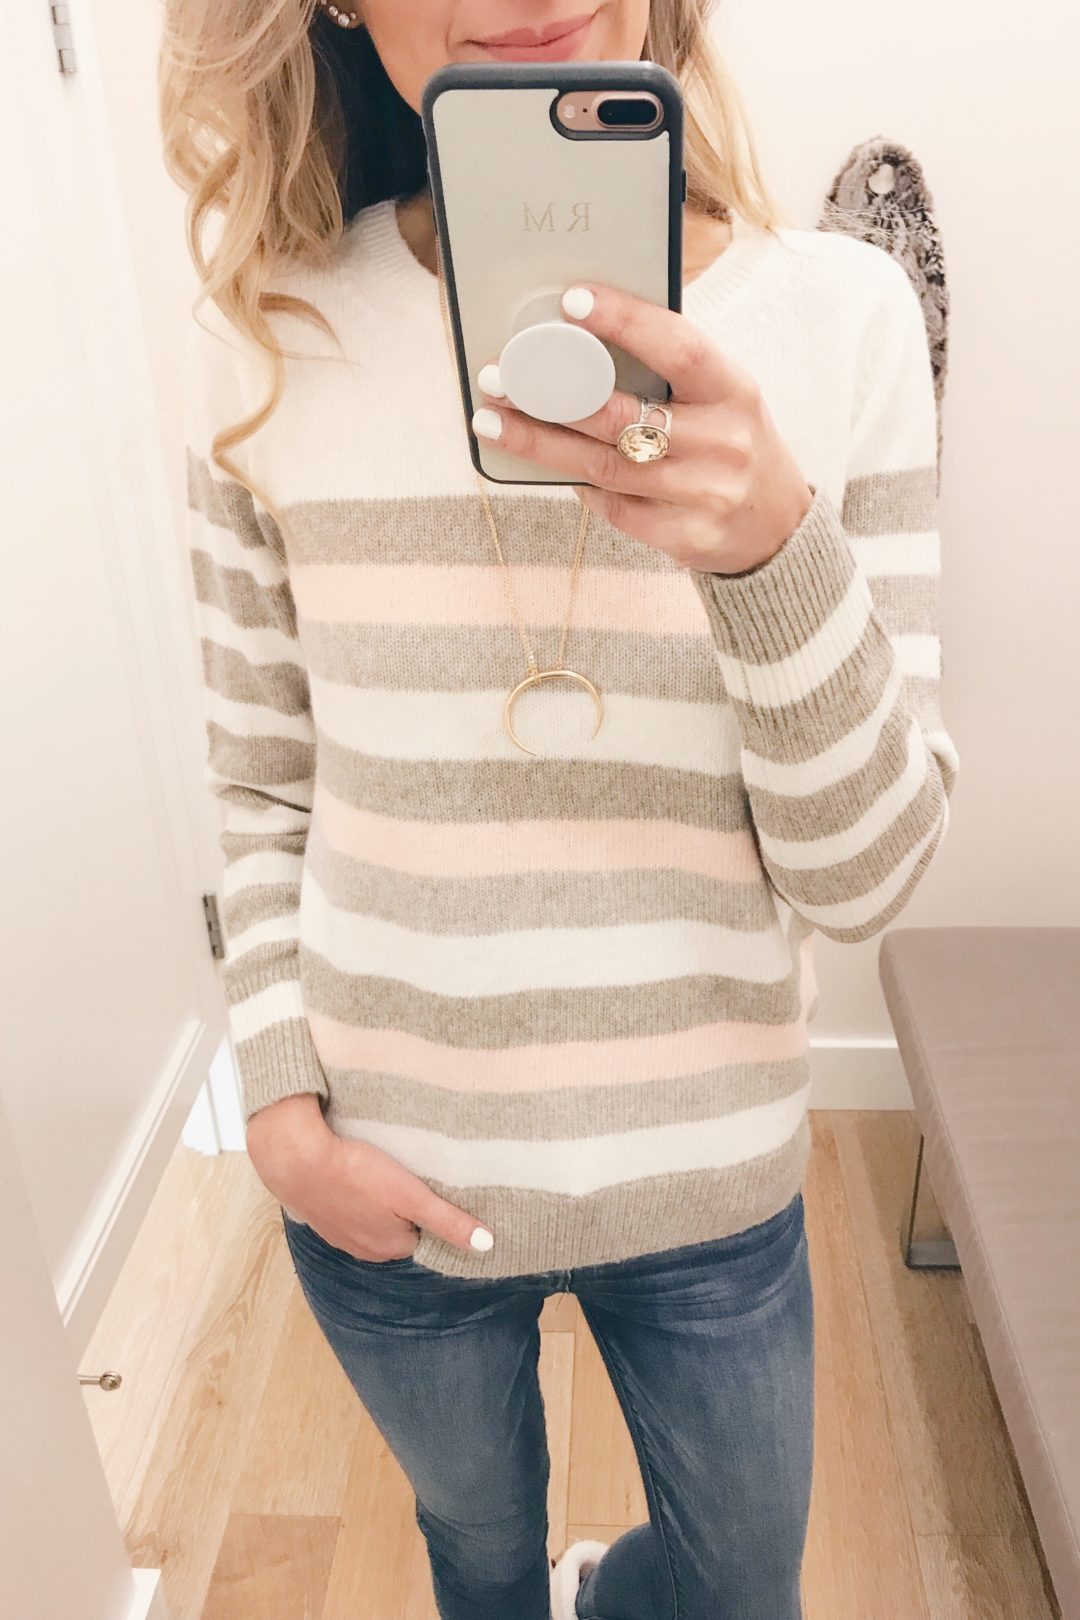 veteran's day weekend sale round up 2018 pink white striped sweater